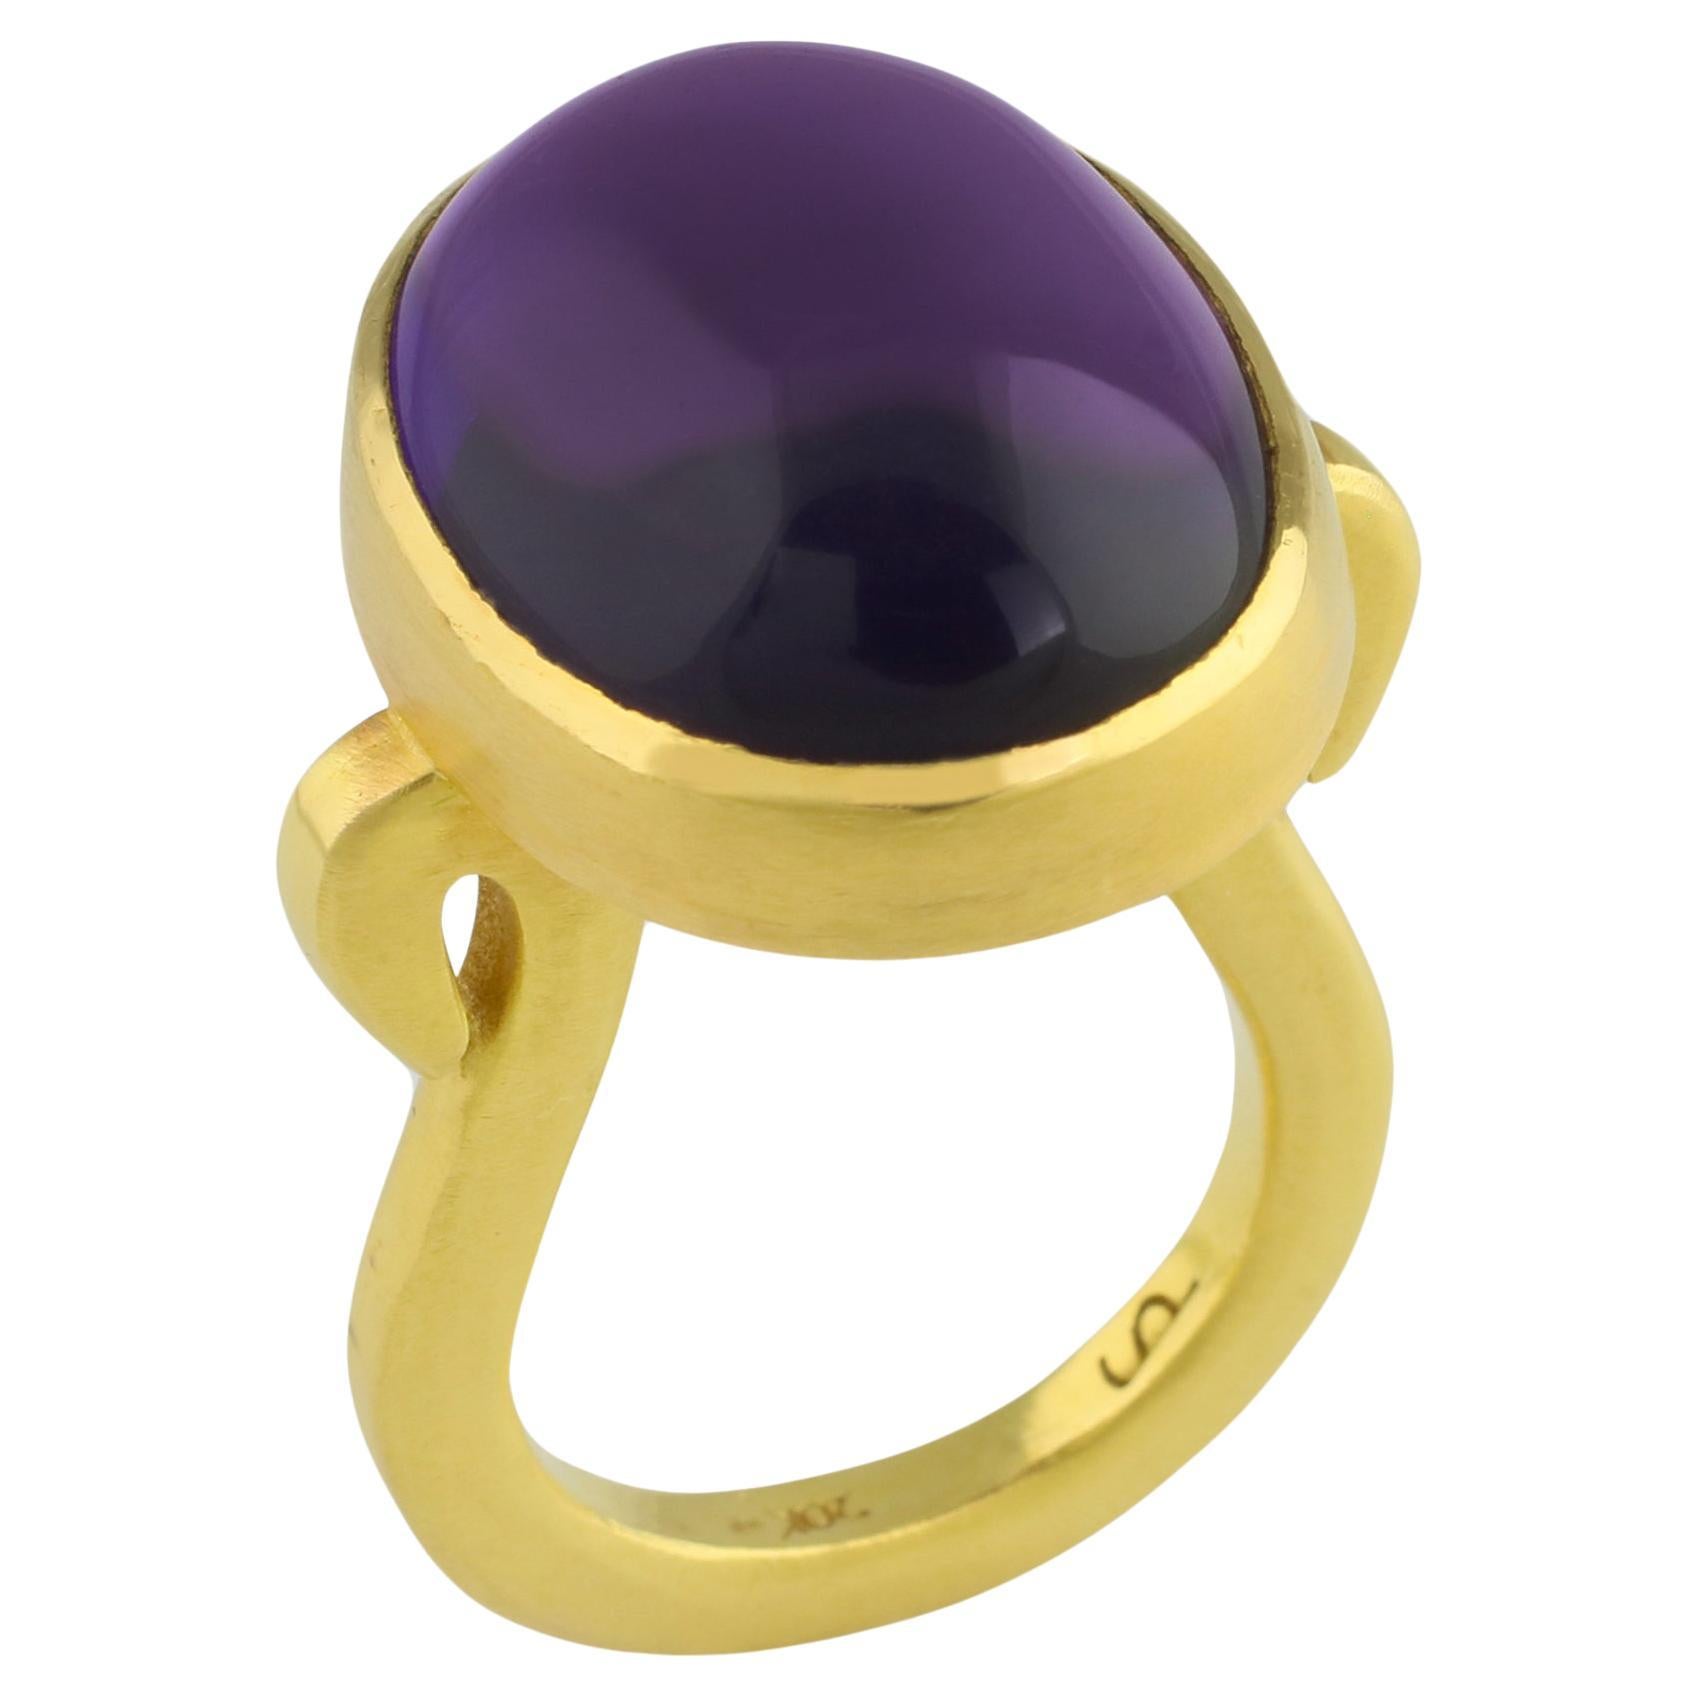 PHILIPPE SPENCER 23.73 Ct. Amethyst in 22K and 20K Gold Statement Ring